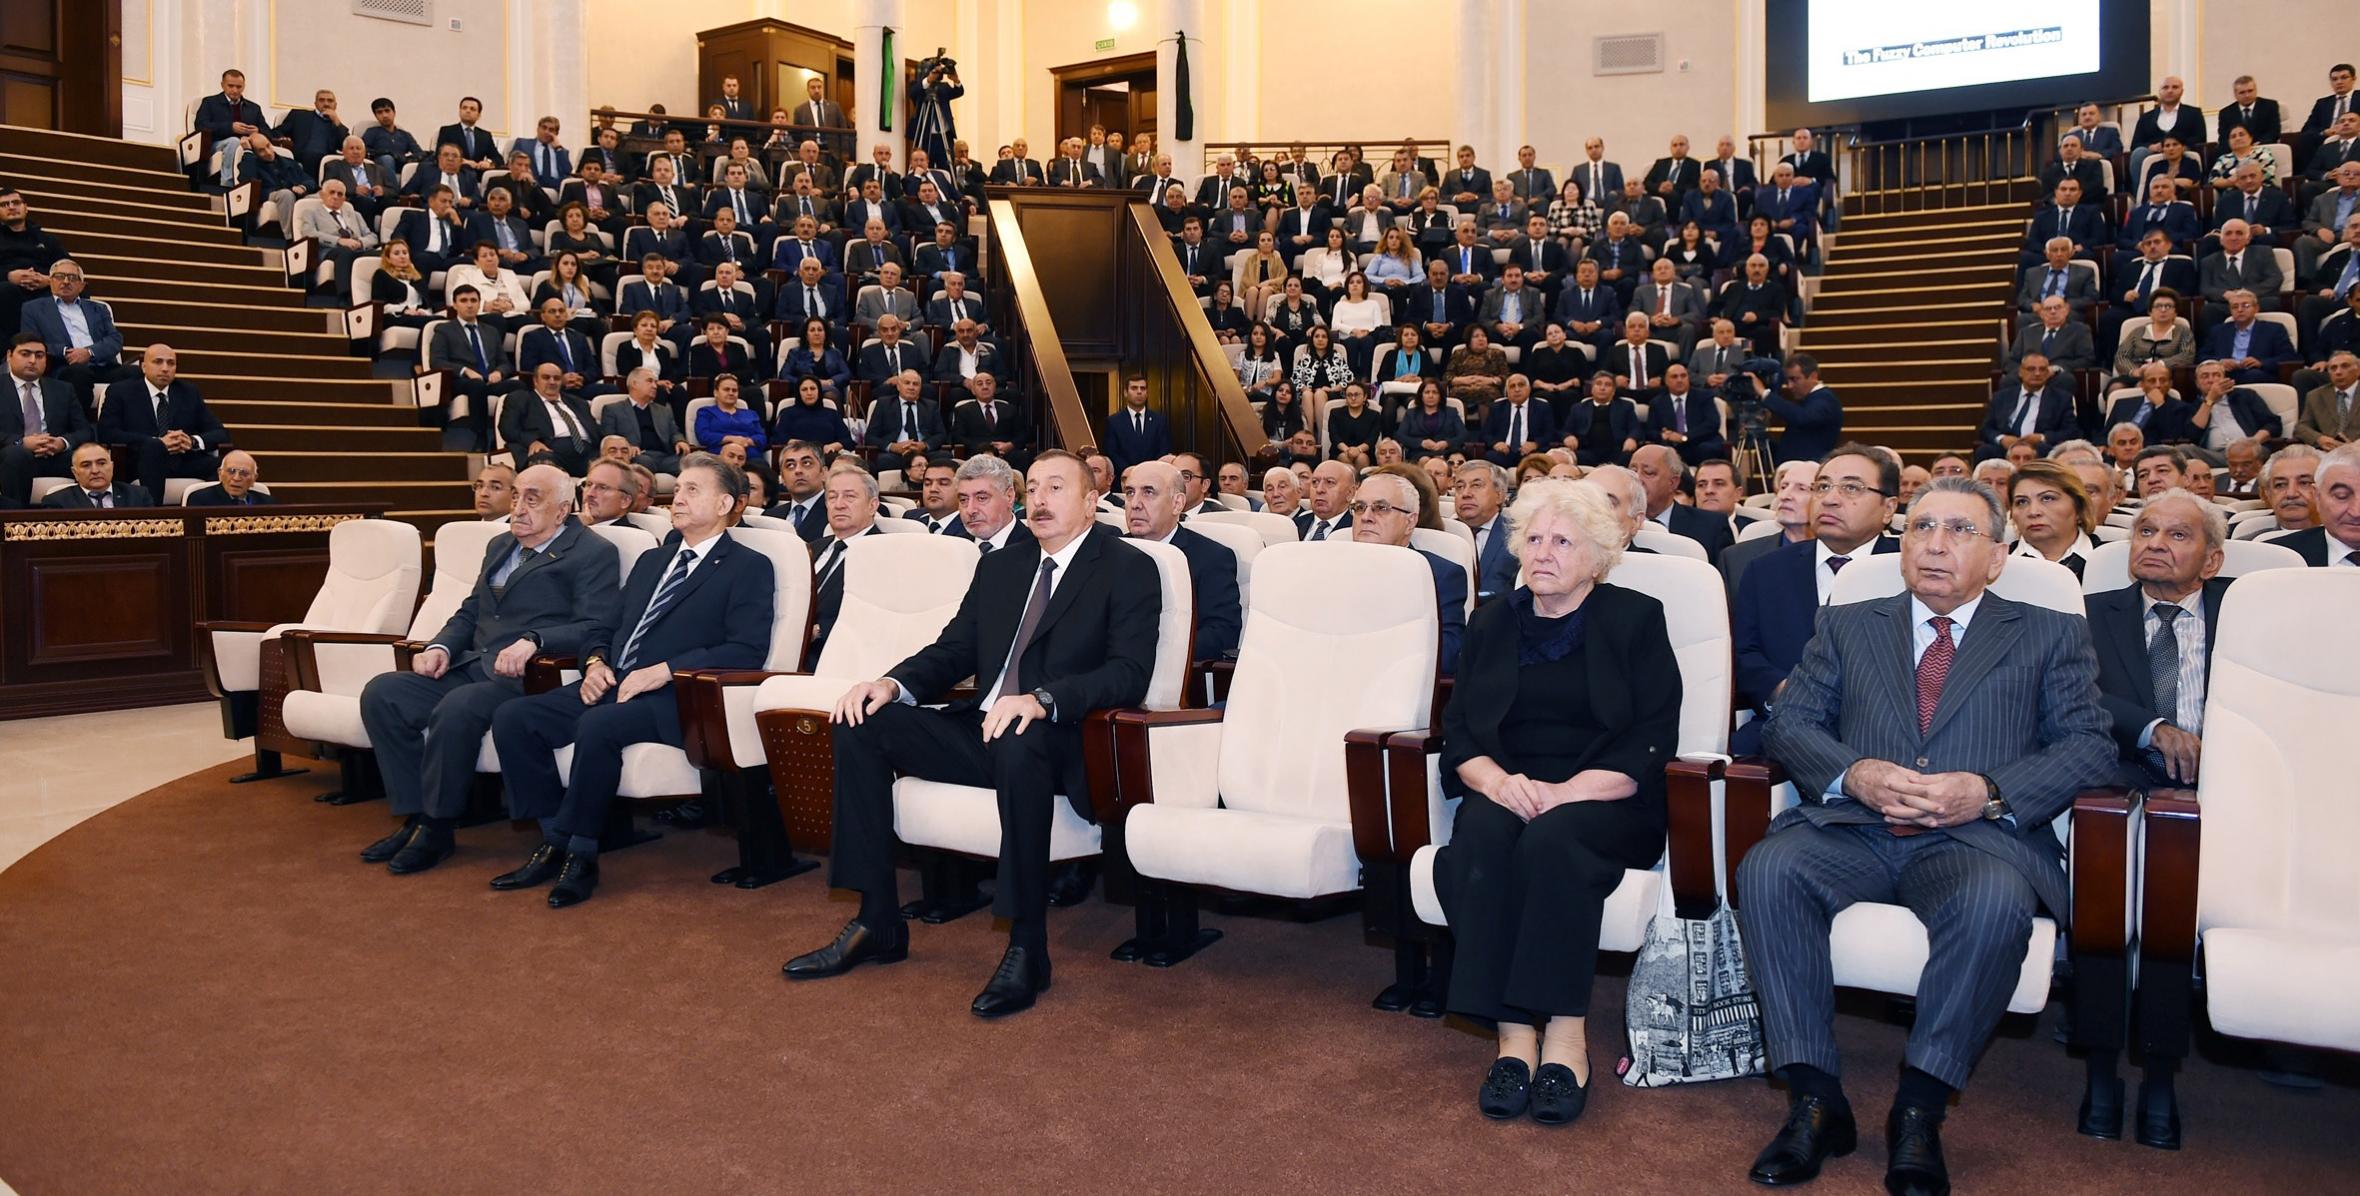 Ilham Aliyev attended farewell ceremony for world-renowned Azerbaijani scientist Lotfi Zadeh